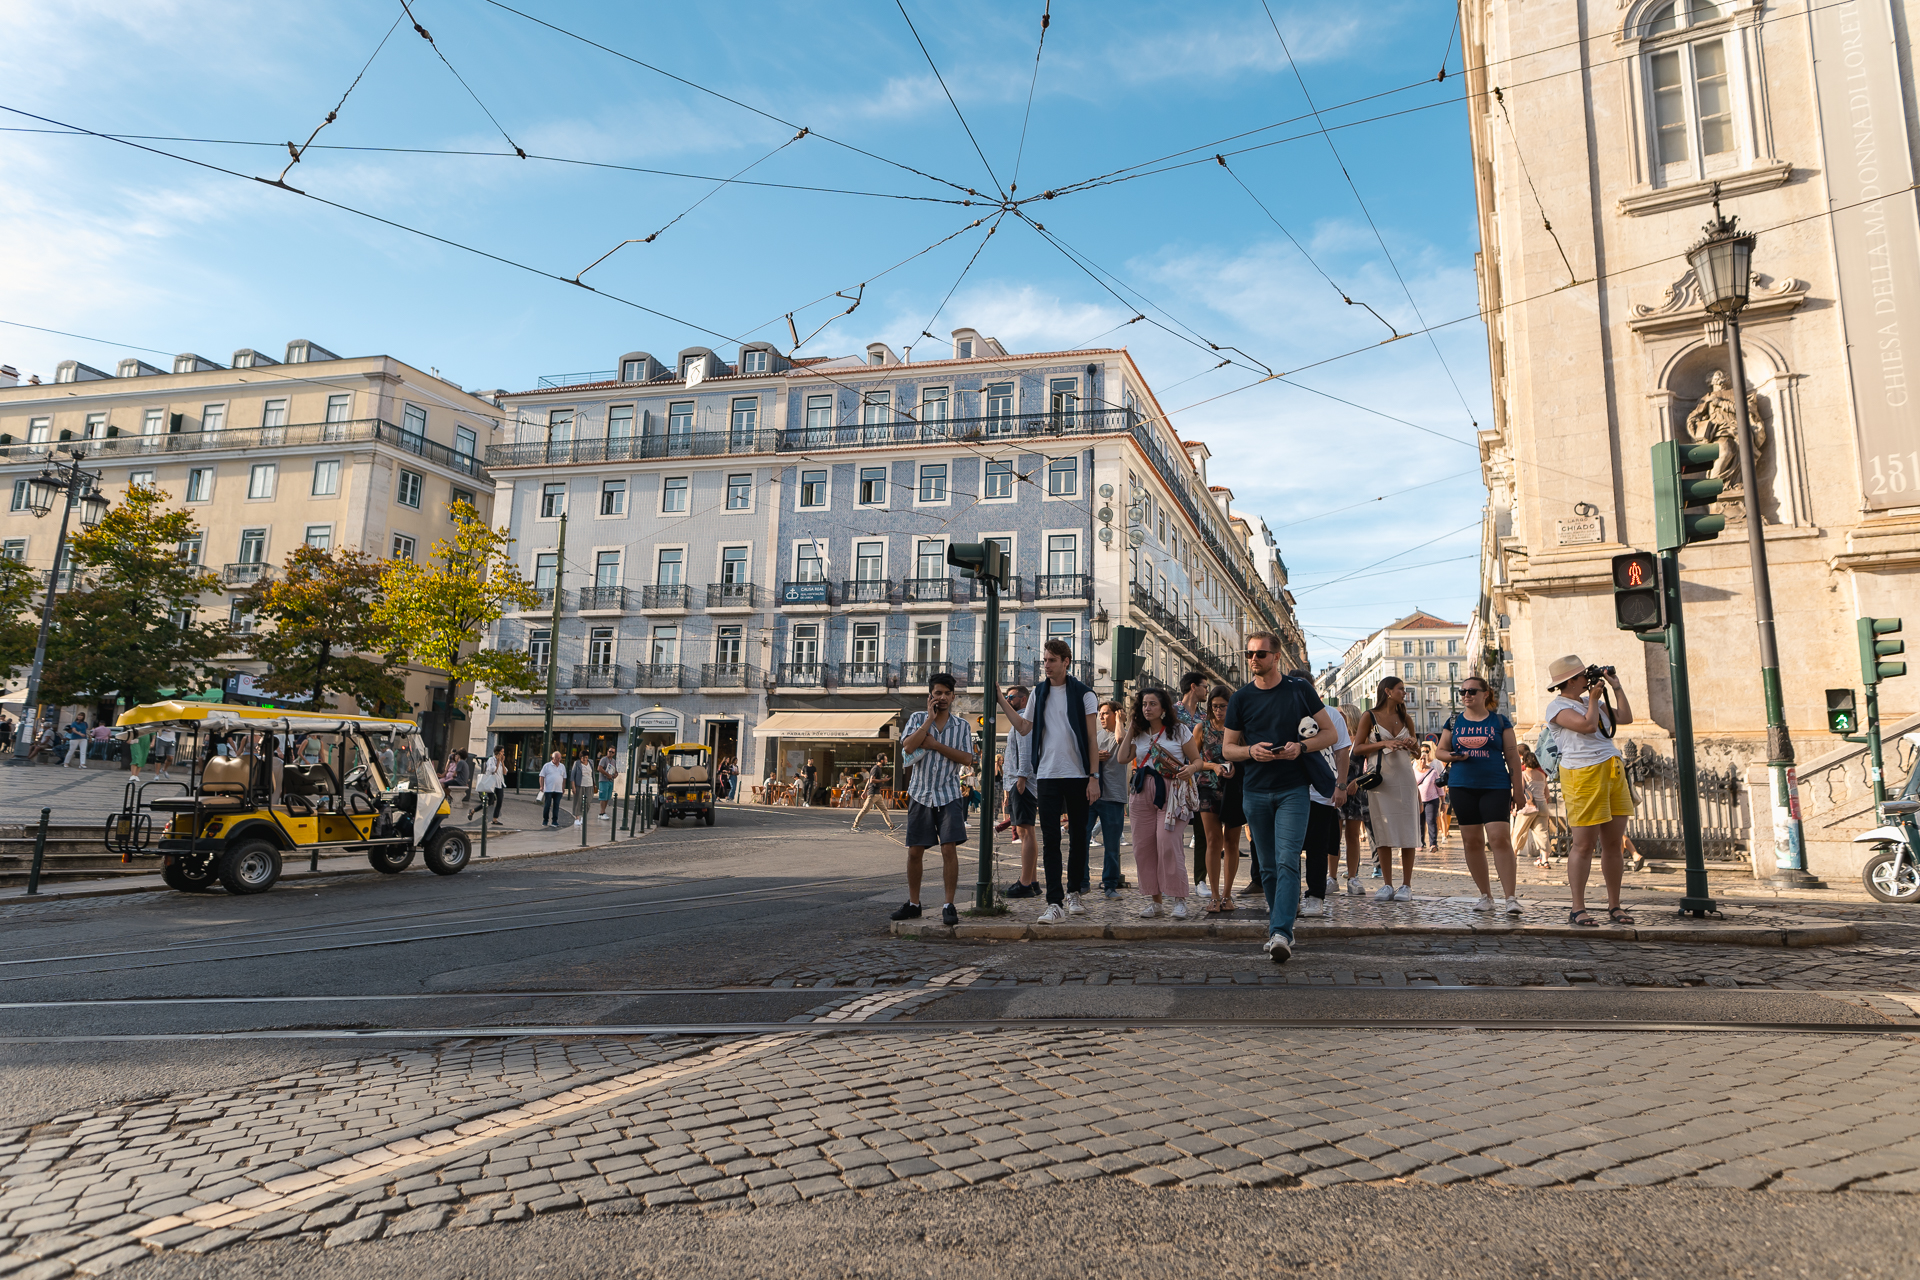 Bustling street scene in the Chiado district of Lisbon with pedestrians, trams, and historic architecture